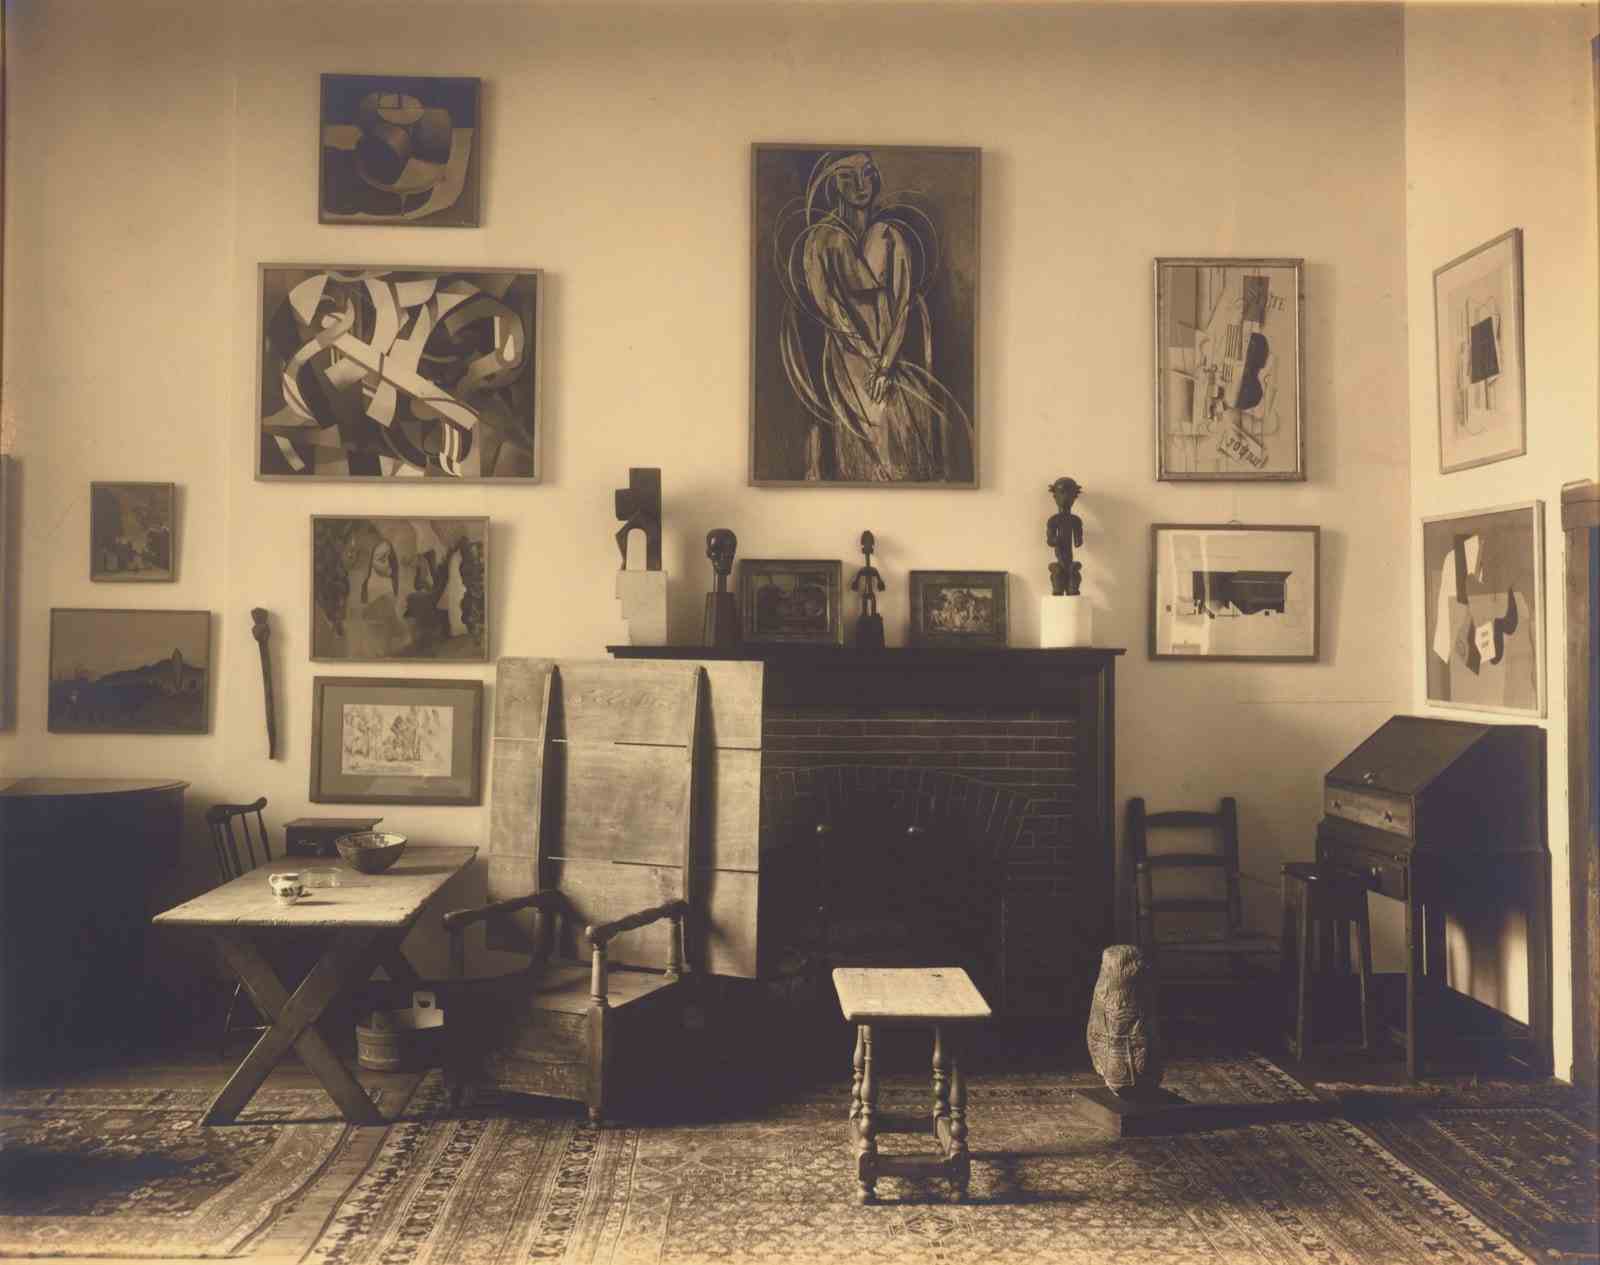 A room filled with wooden furniture and paintings hung on the walls.